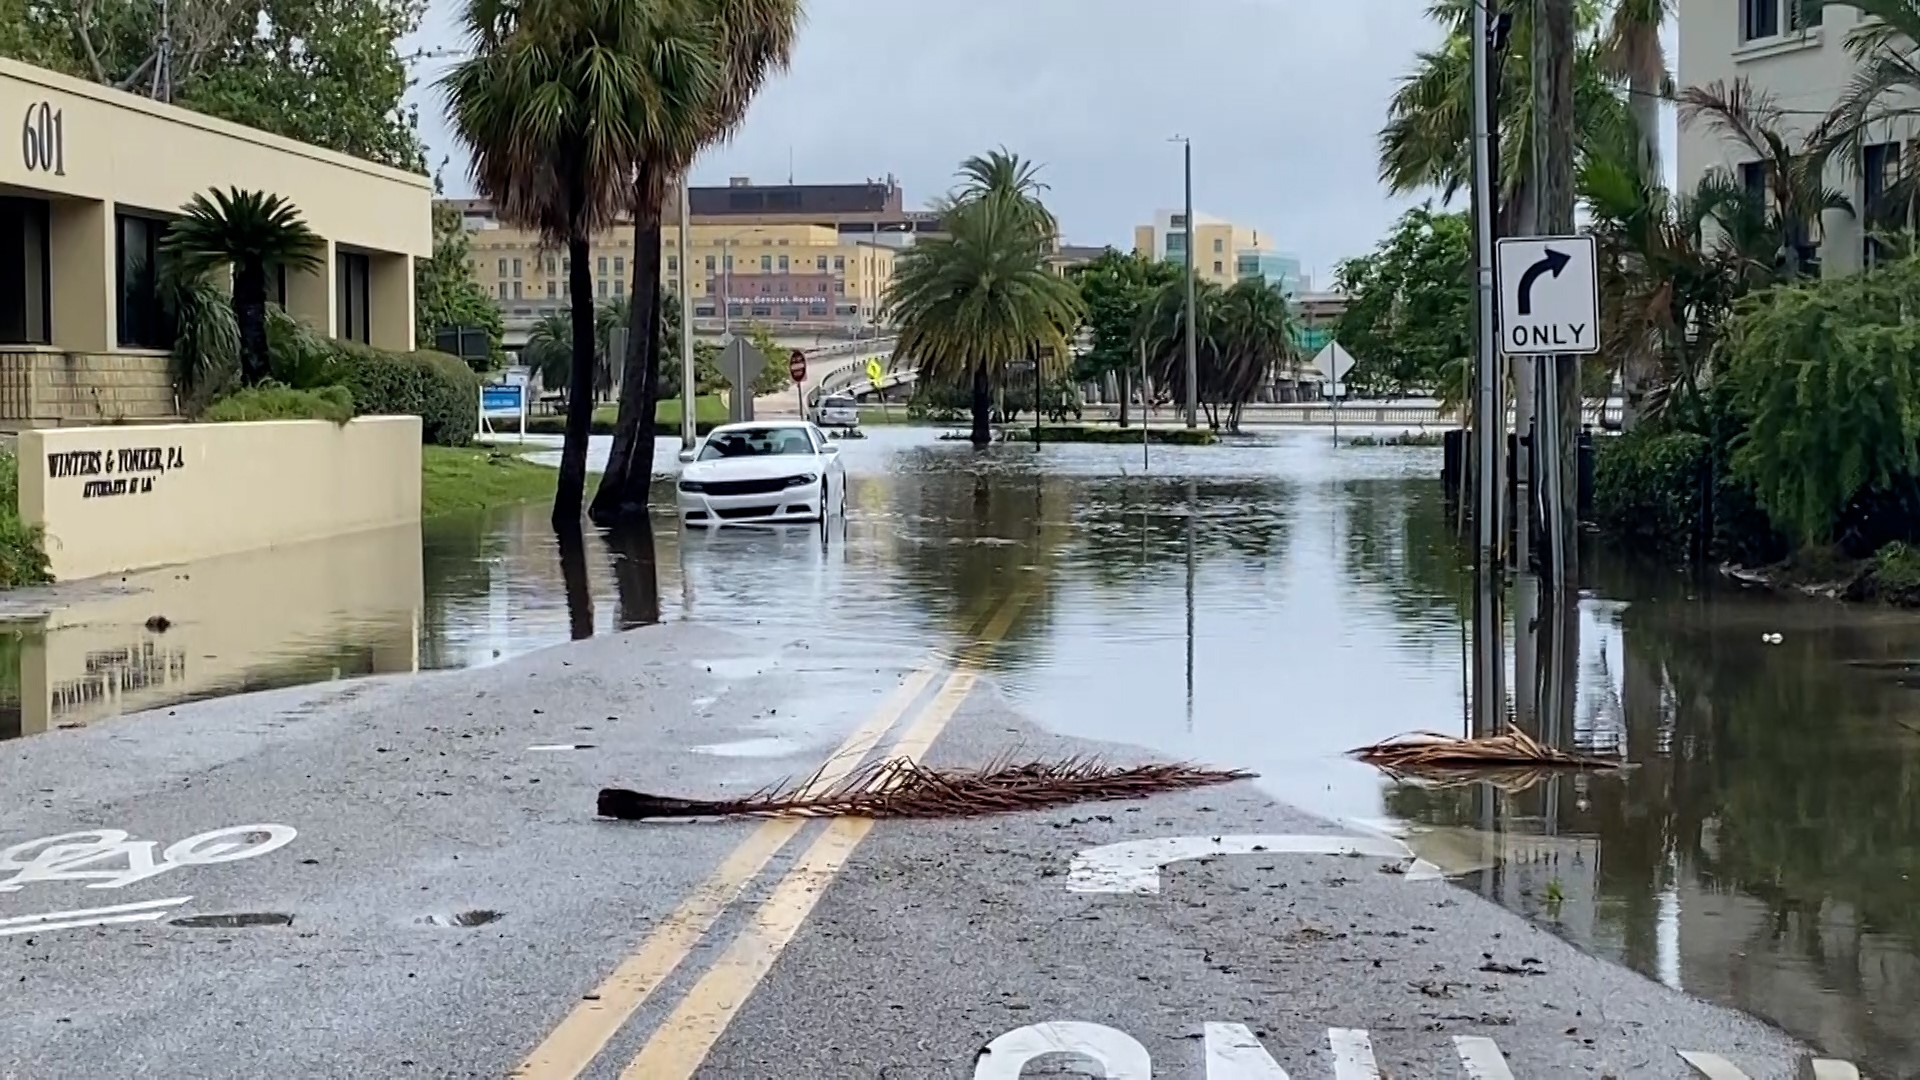 The storm slammed into Florida, ripped roofs off hotels and turned small cars into boats before sweeping into Georgia.